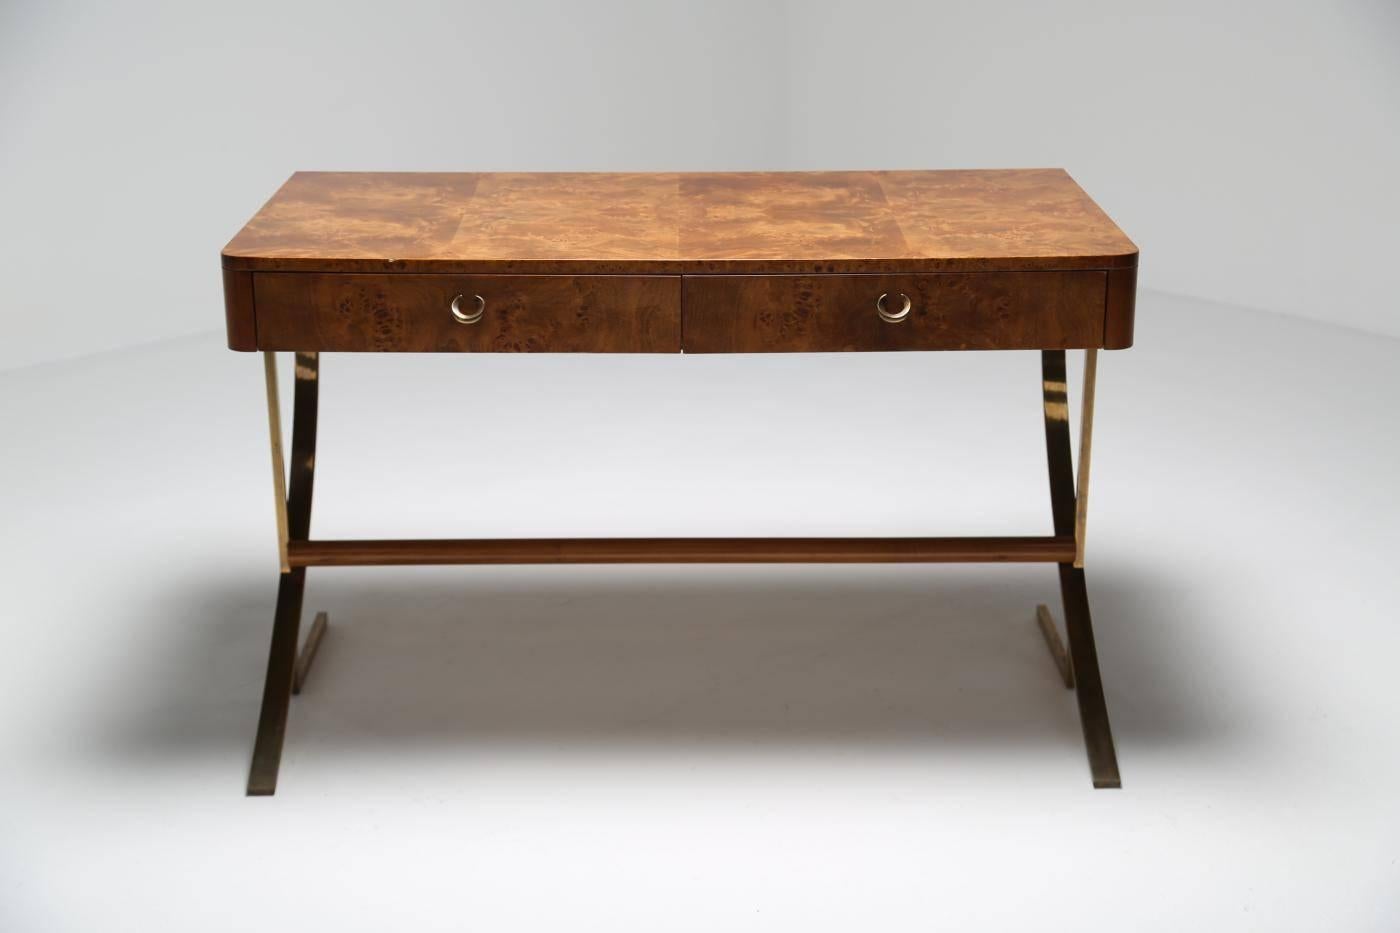 Plated Hickory White Burl Wood Desk with Brass Legs